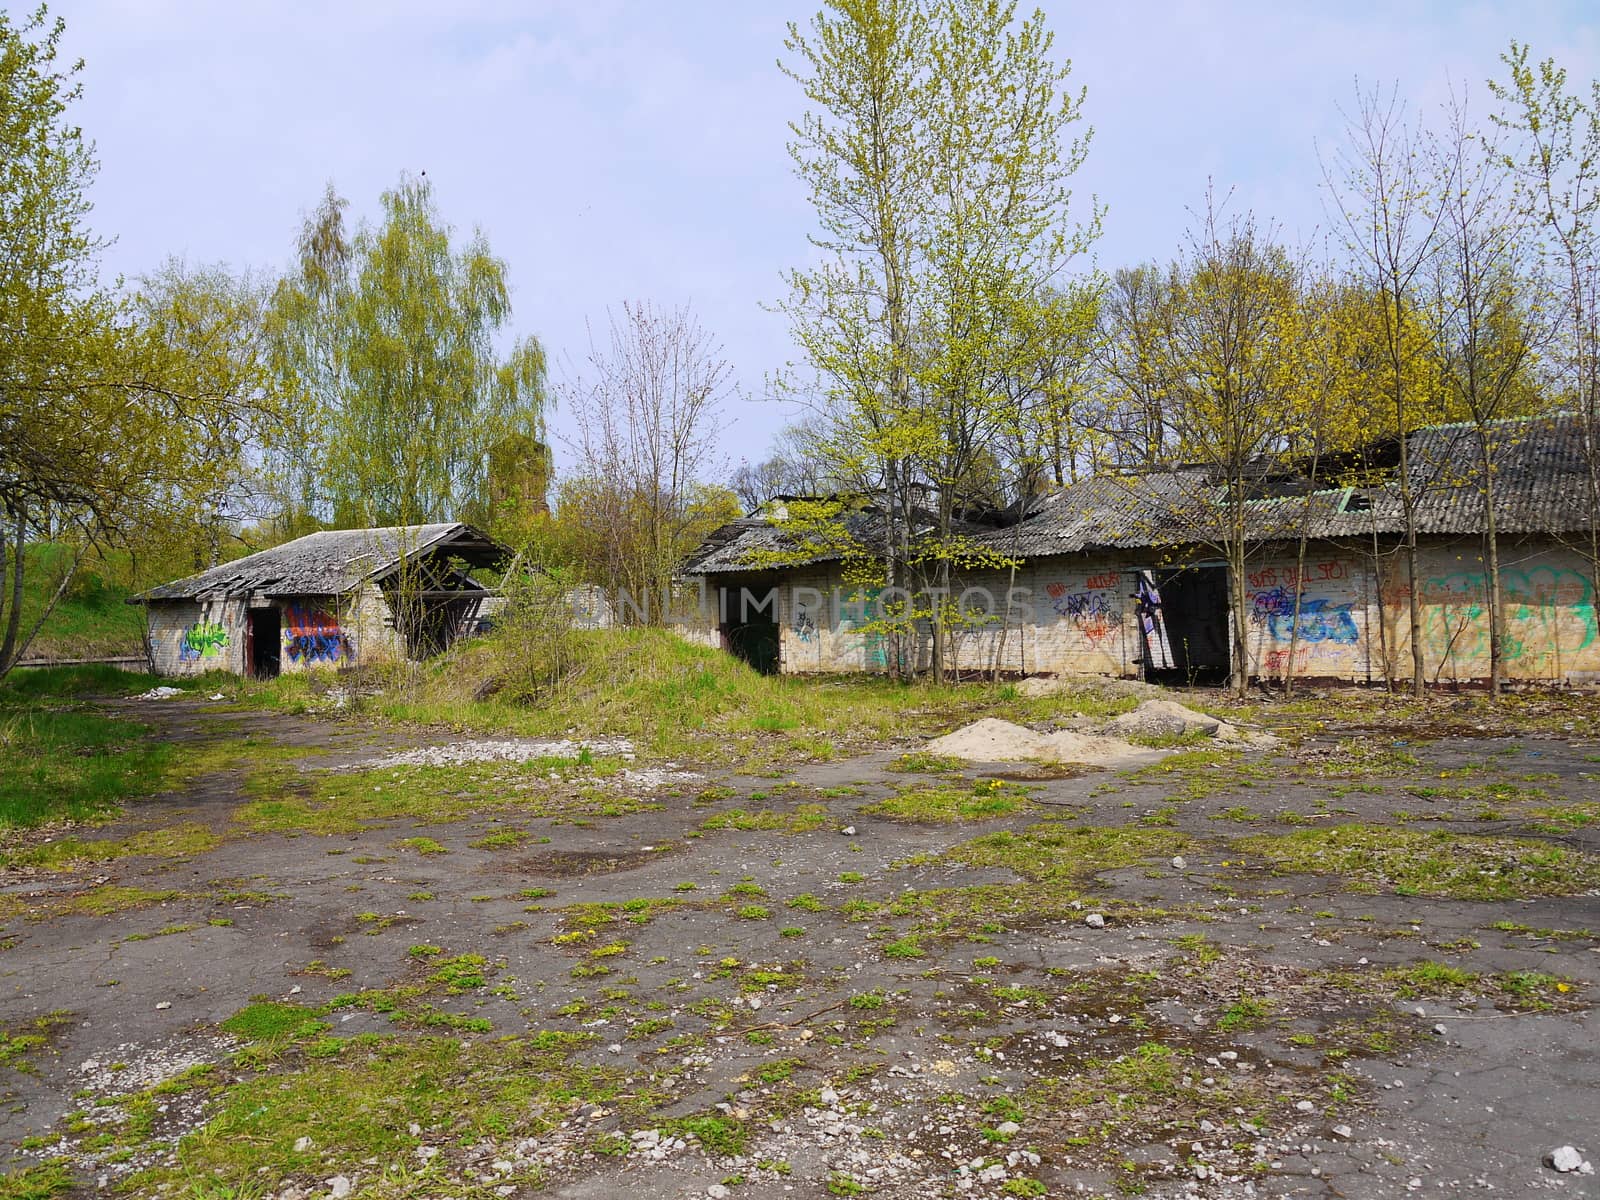 Old military base of Soviet army in Latvia